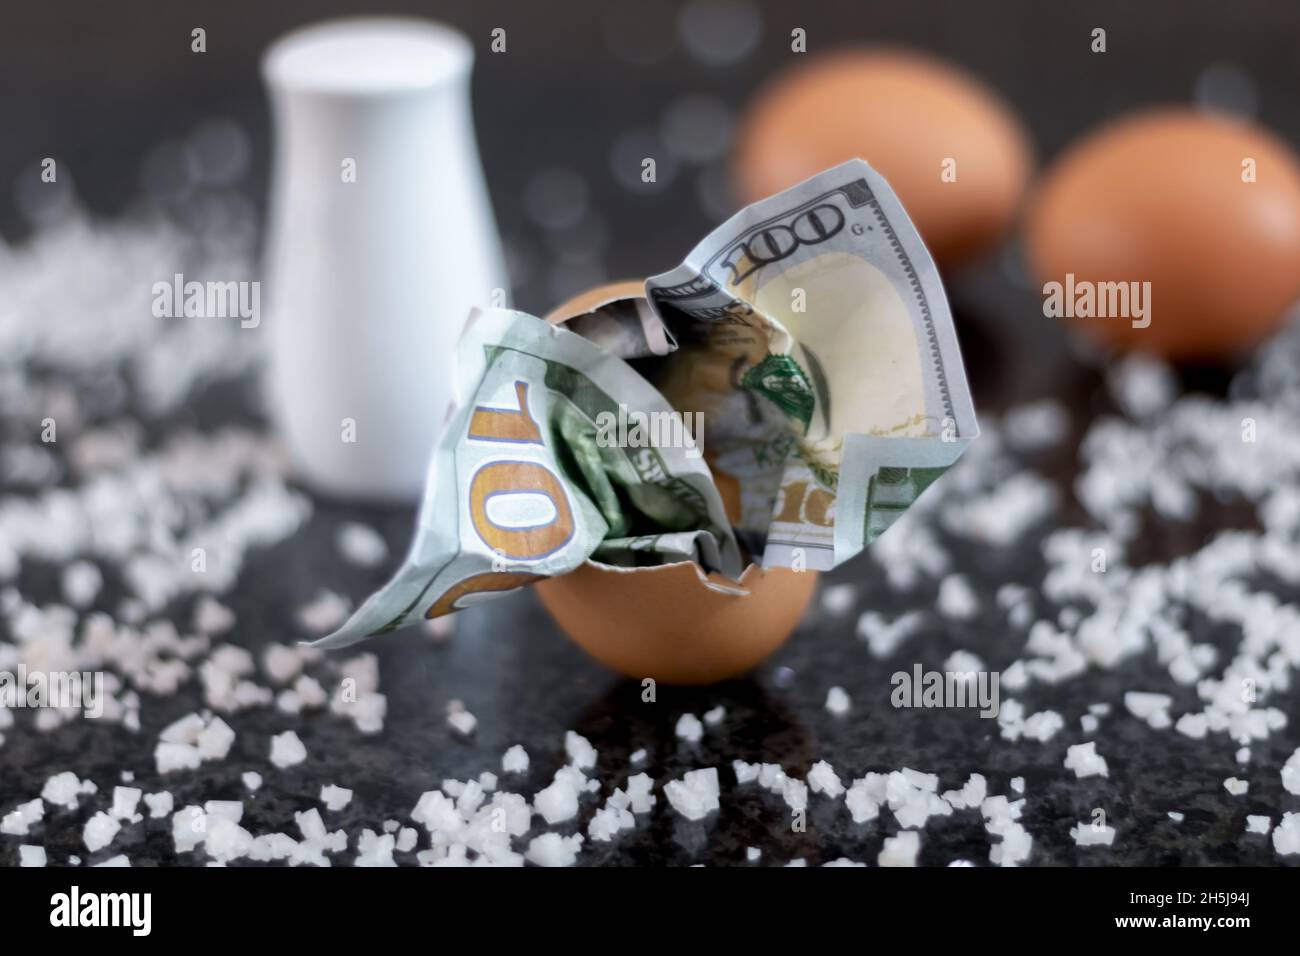 A dollar bill in a cracked egg shell - as a symbol of over-enrichment of a small, narrow group of the population - even while eating breakfast. Stock Photo